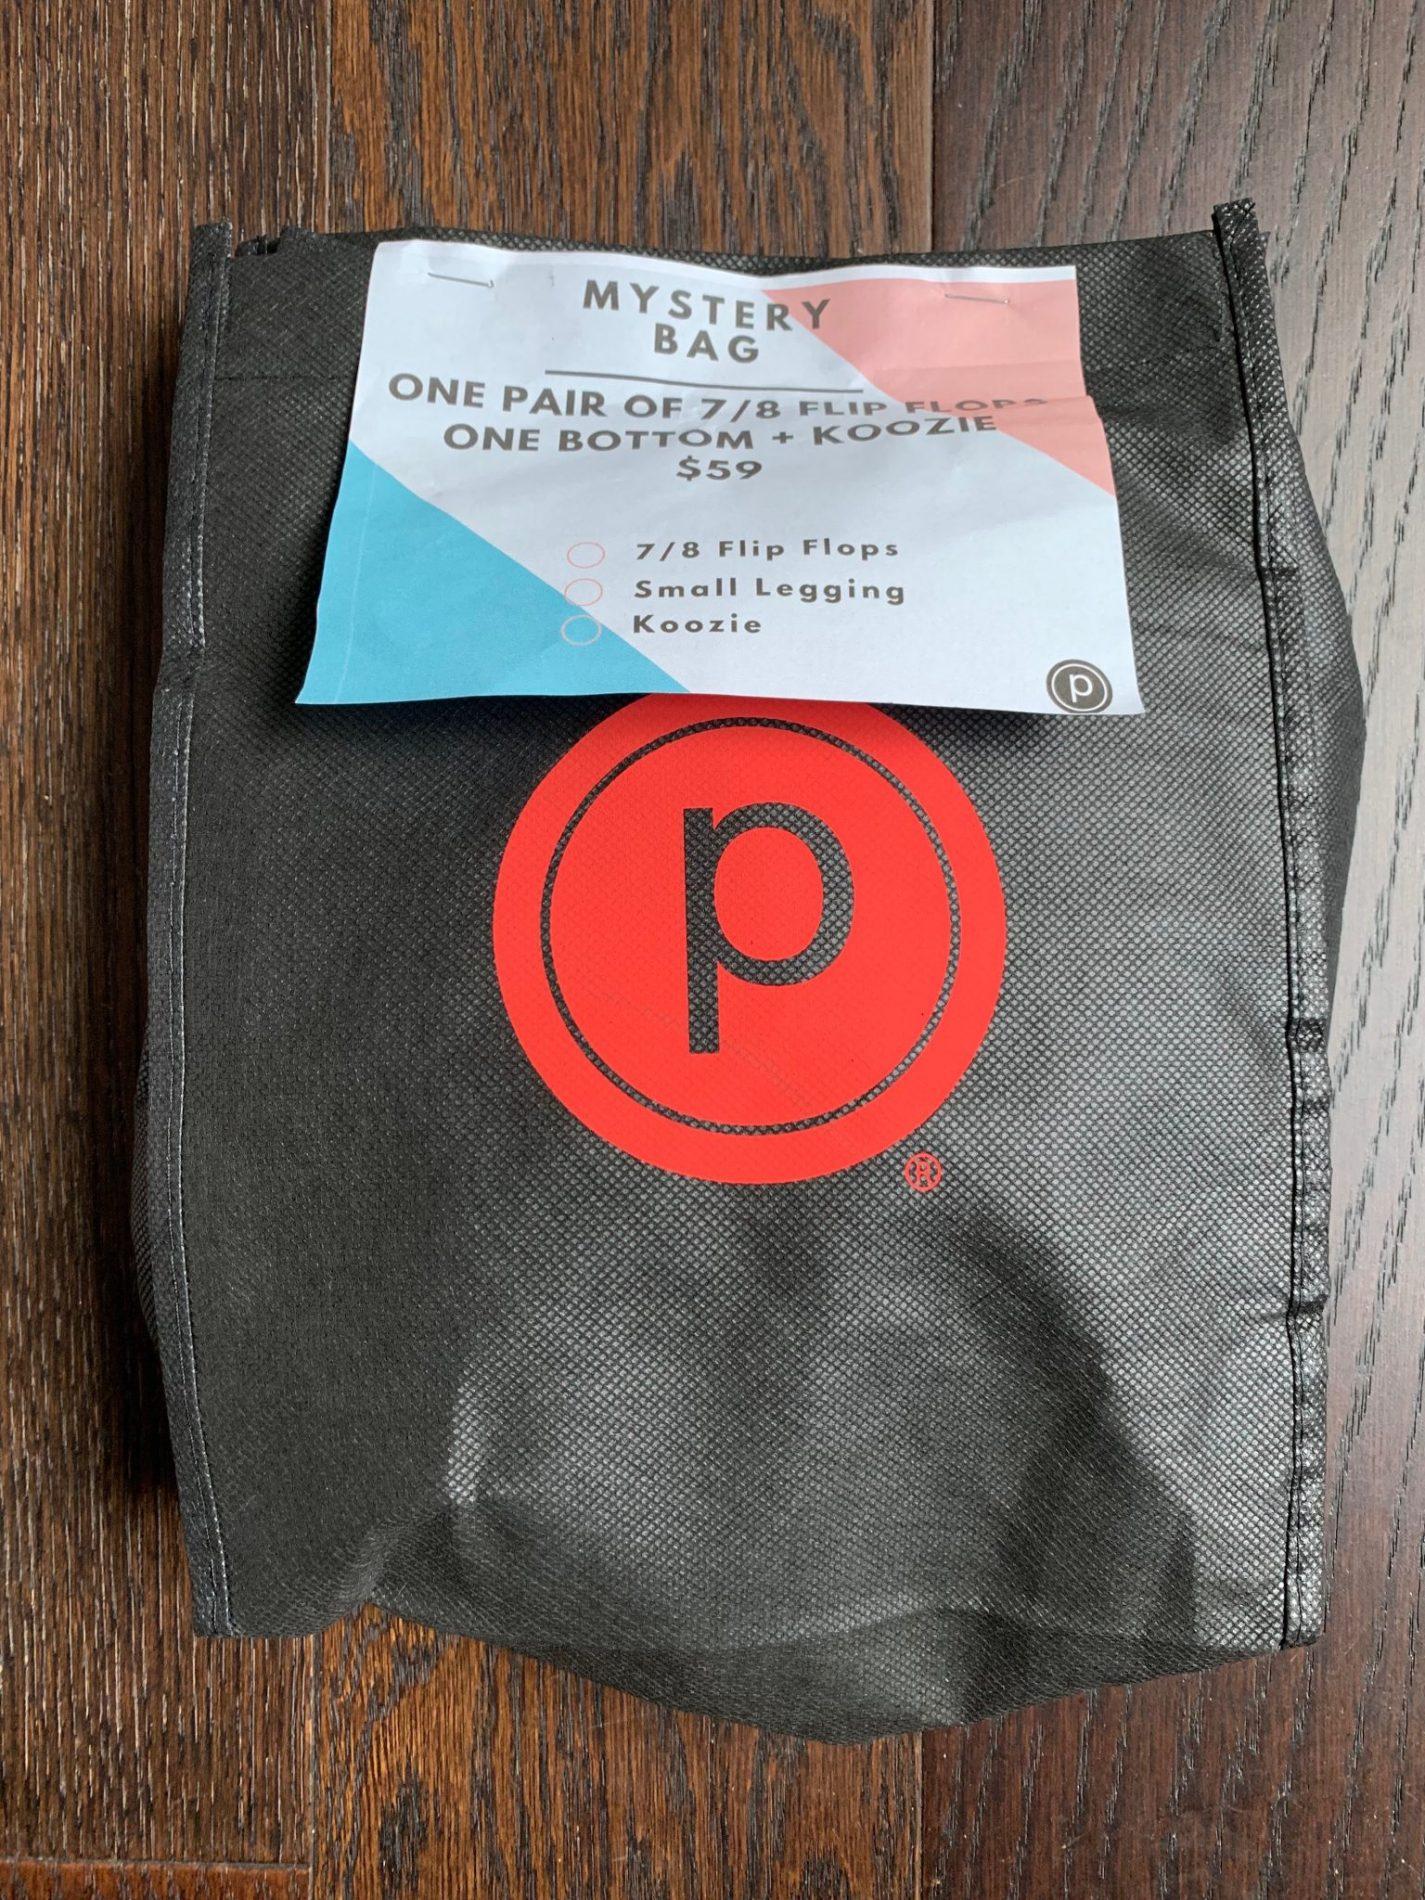 Read more about the article Pure Barre Mystery Bag Review!